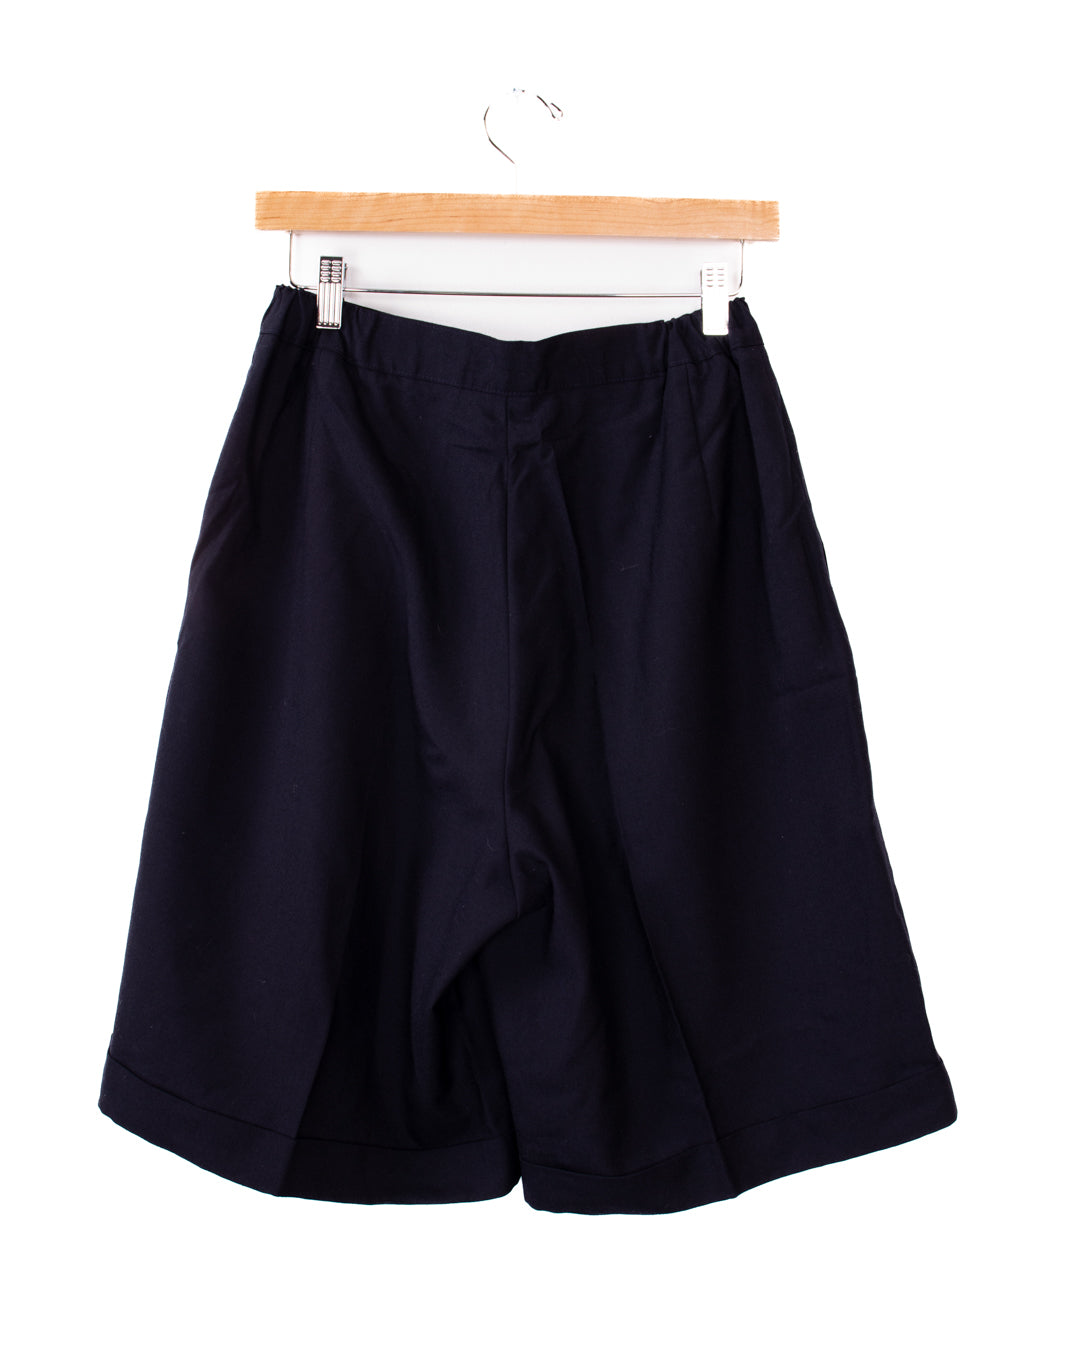 Continental Airlines Employee Black Pleated Shorts